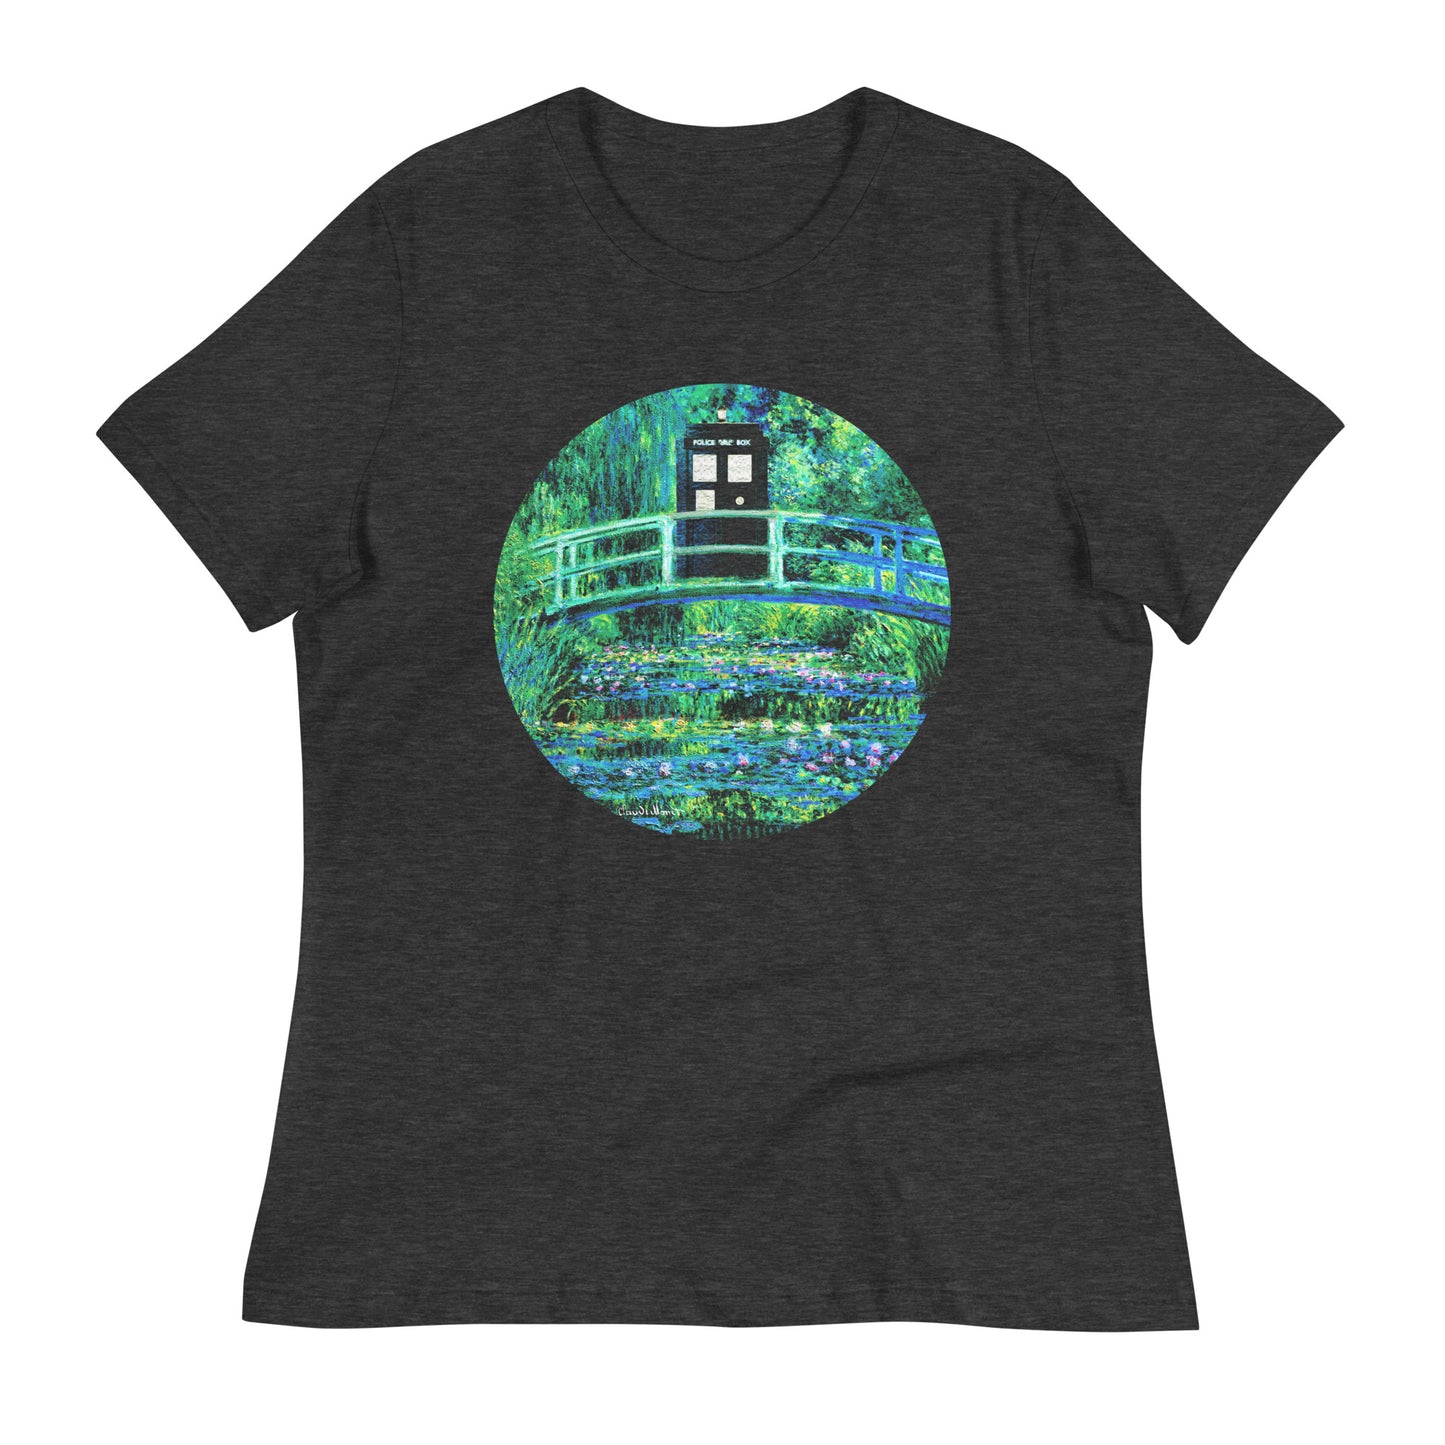 Water Lilies Police Box Women's Signature Tee